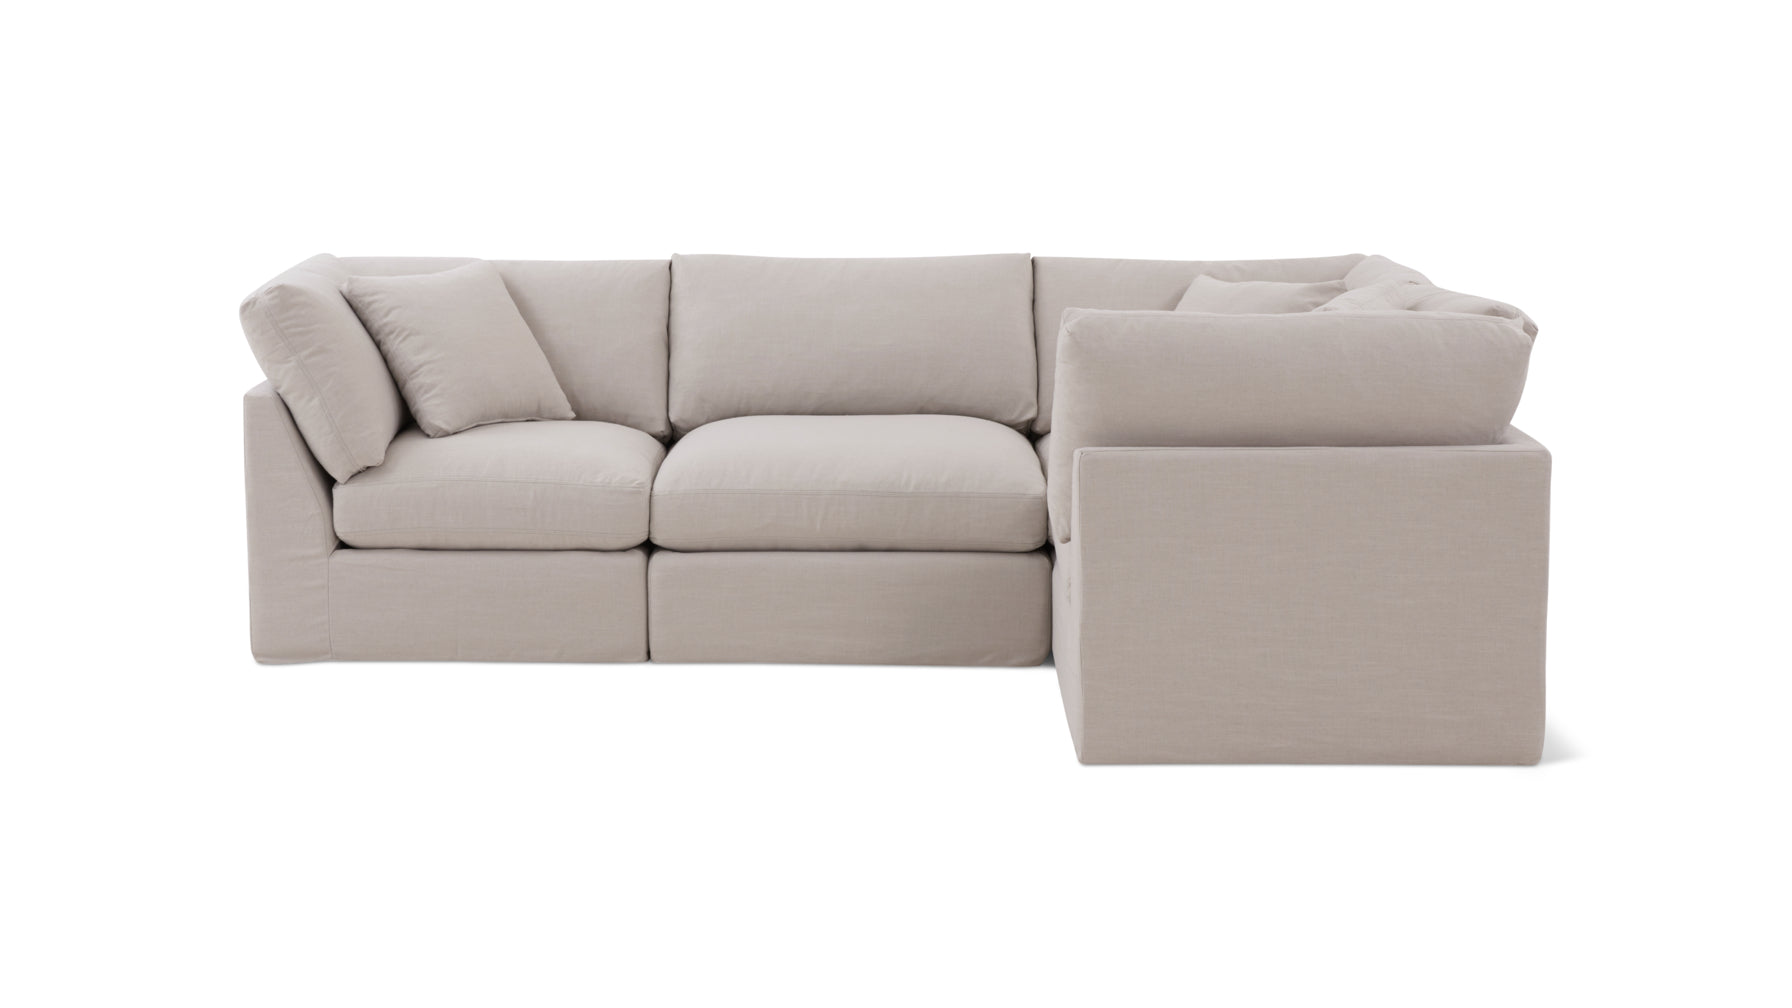 Get Together™ 4-Piece Modular Sectional Closed, Standard, Clay - Image 1